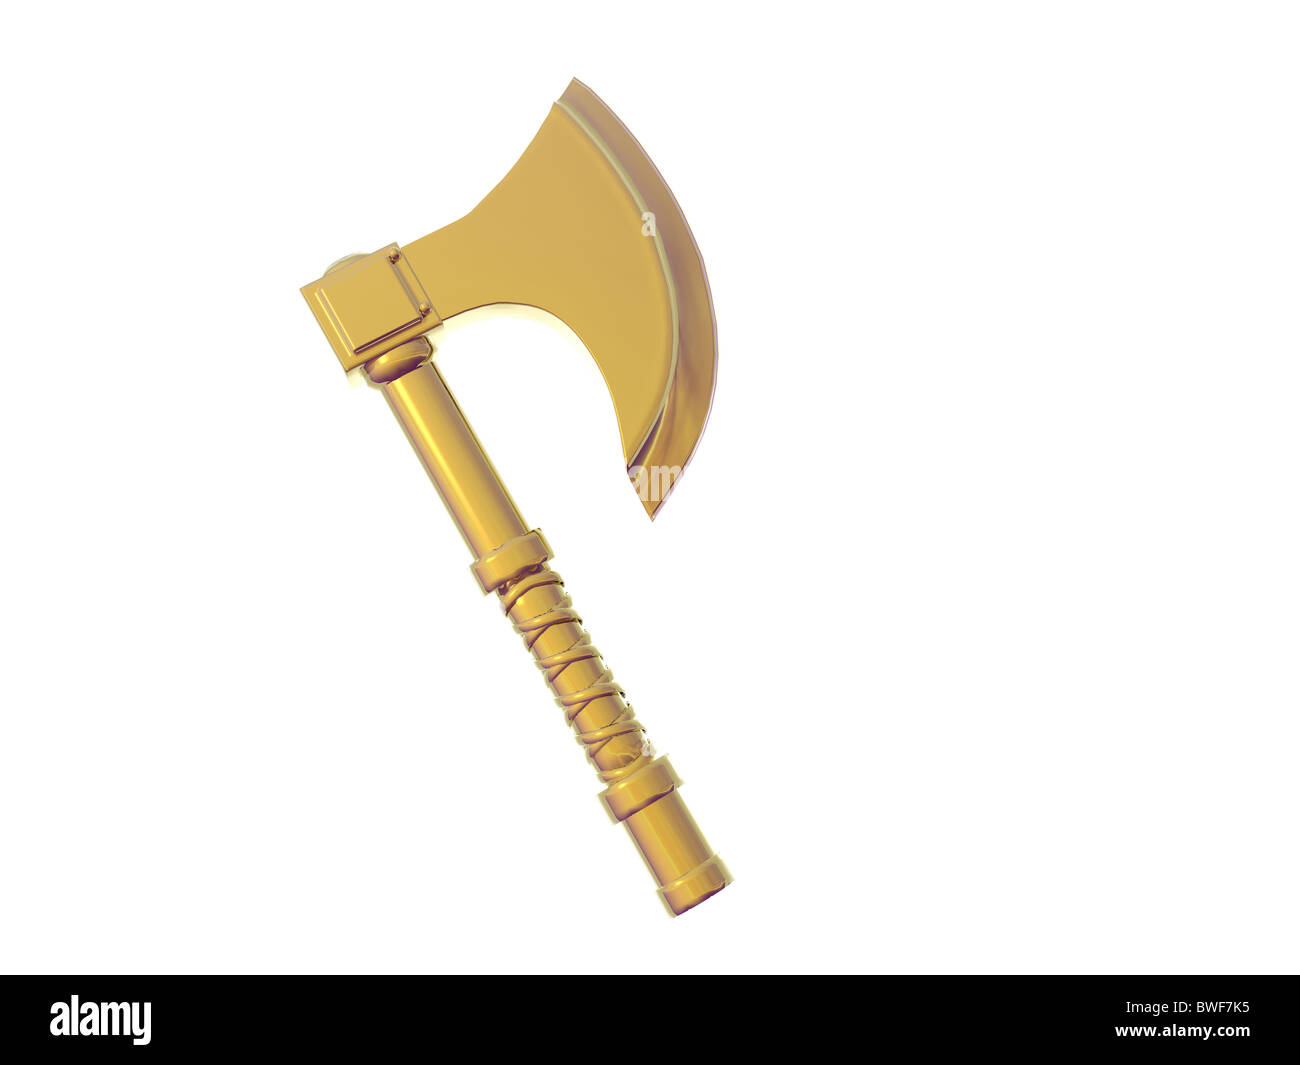 Battle axe Cut Out Stock Images & Pictures - Alamy